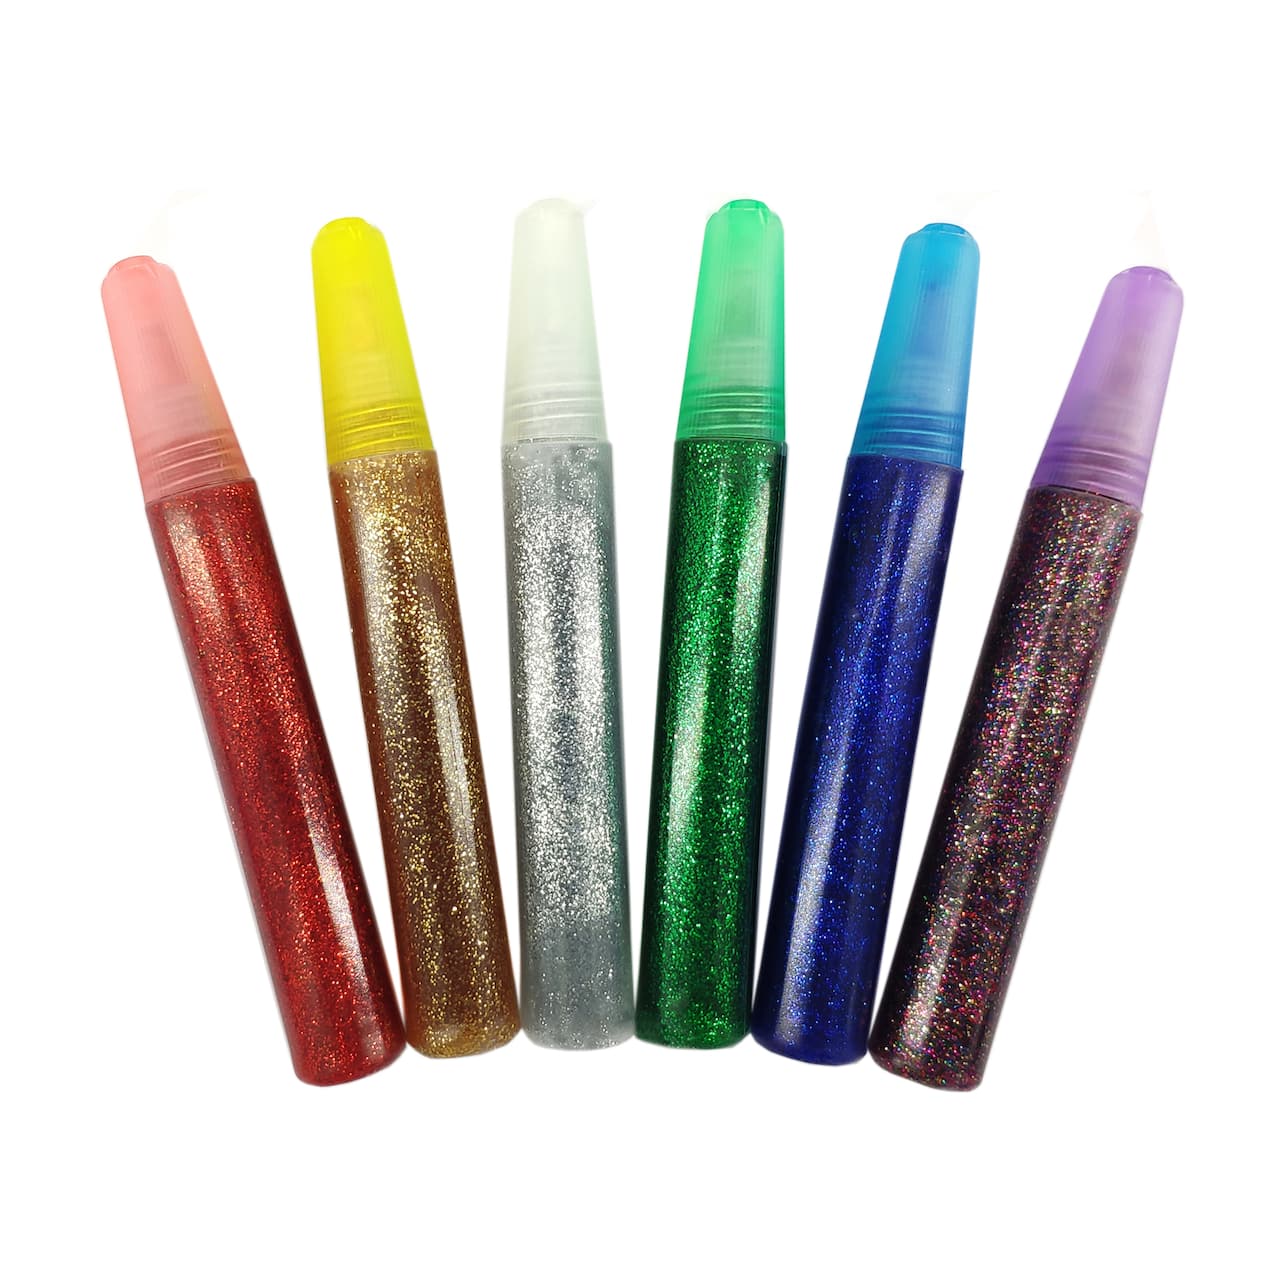 Primary Glitter Glue Pens by Creatology&#x2122;